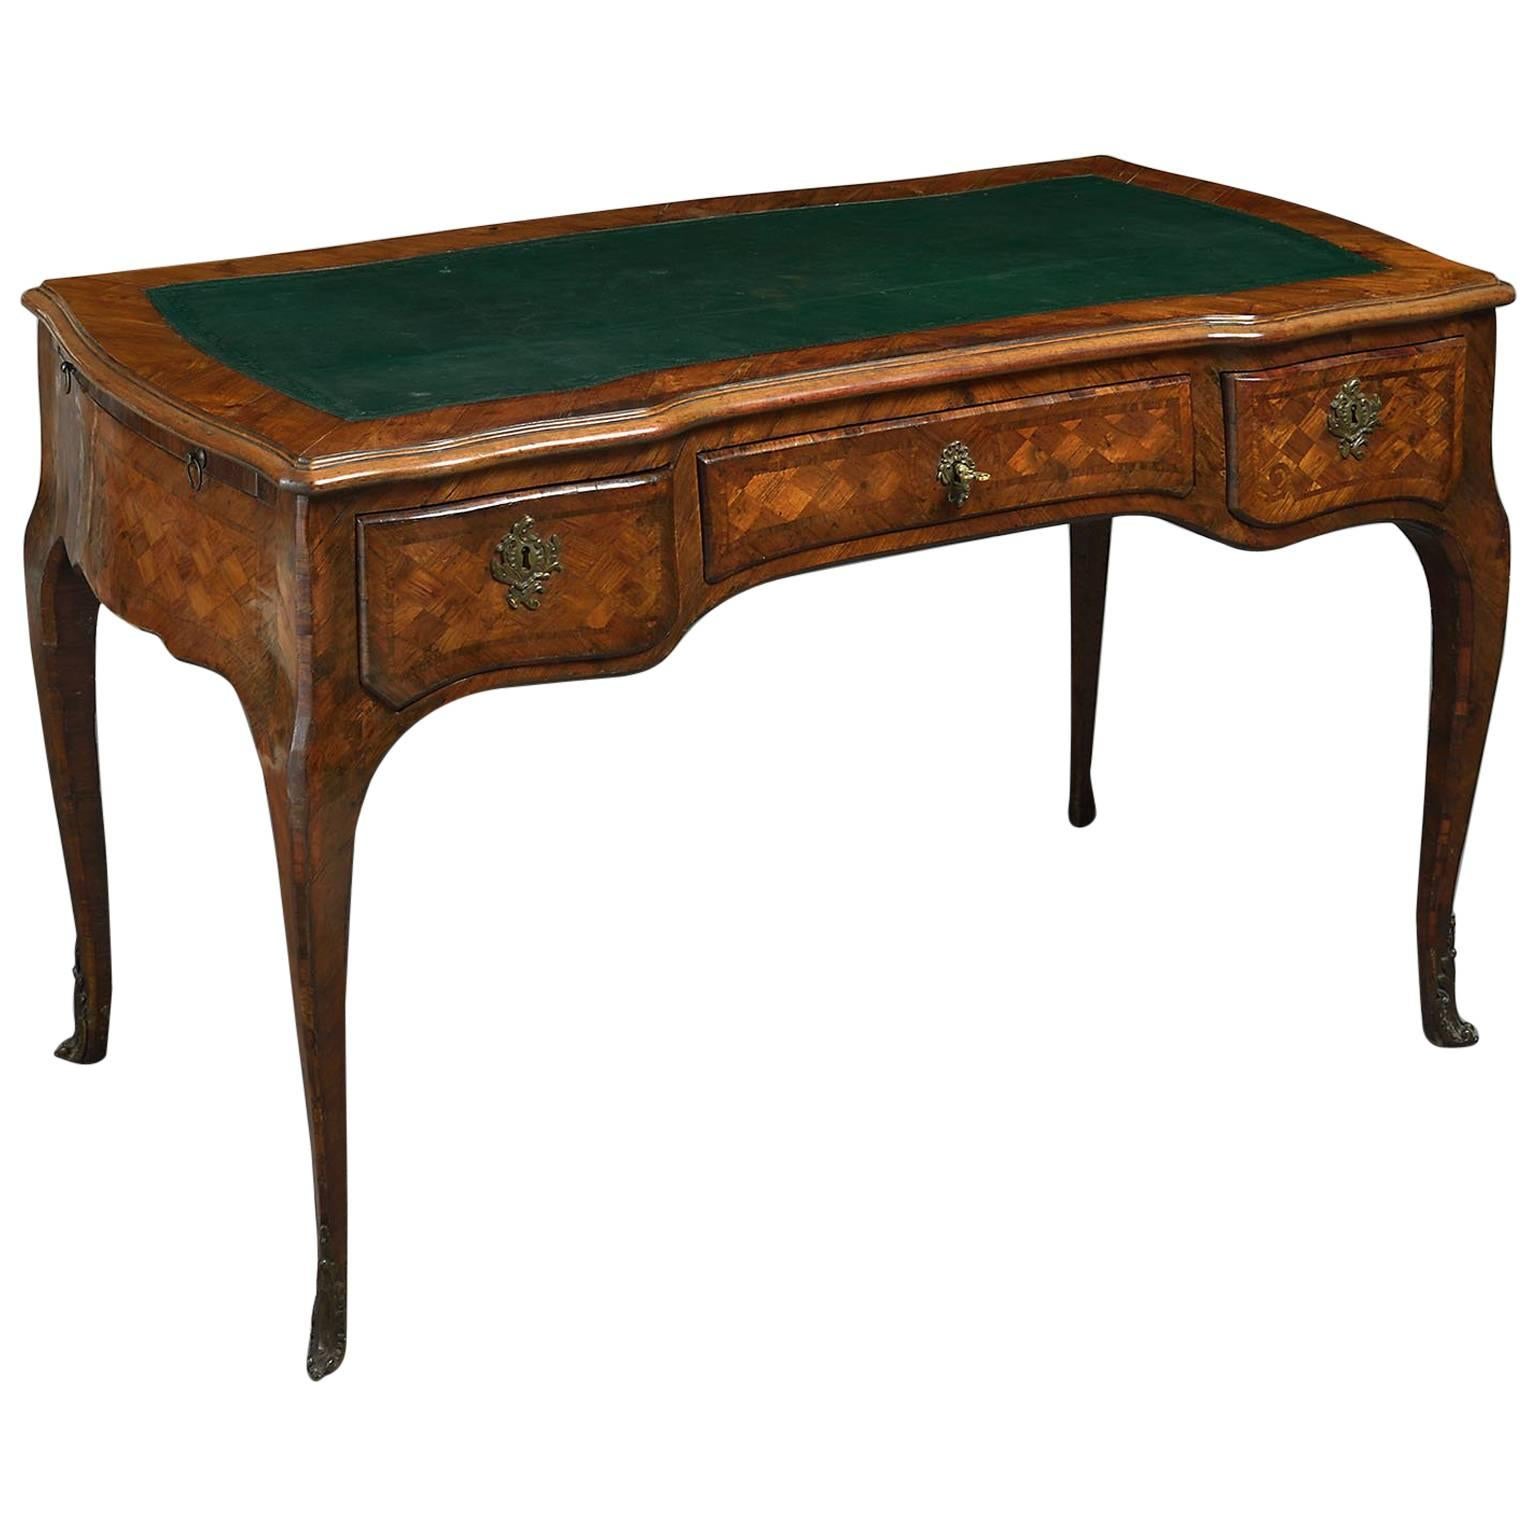 18th Century Kingwood and Tulipwood Parquetry Serpentine Bureau-Plat For Sale